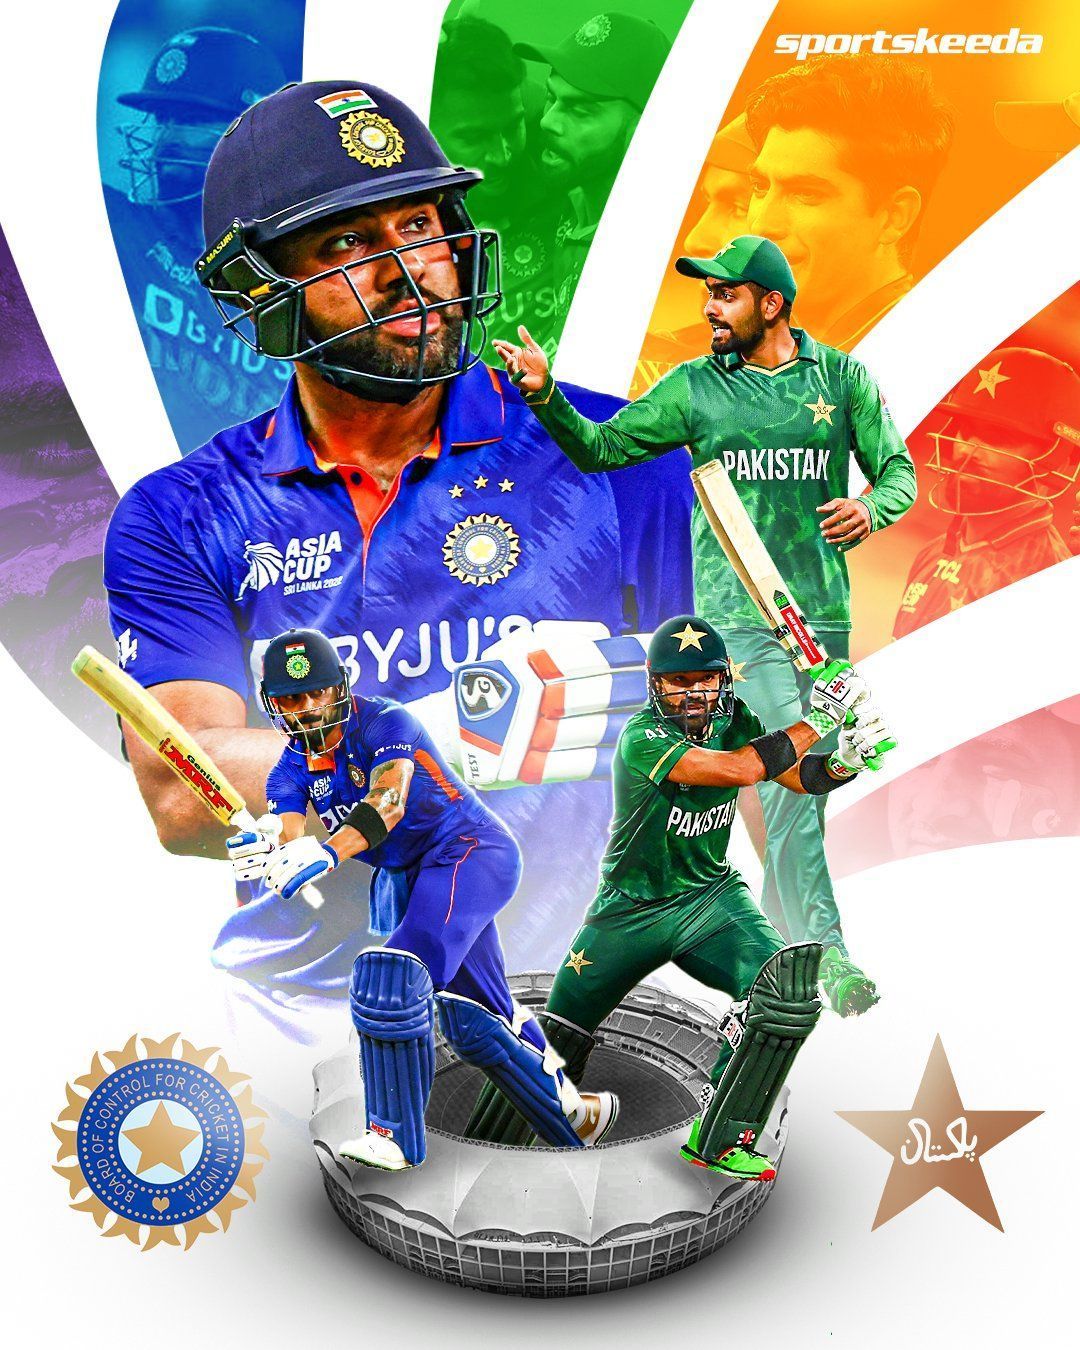 India and Pakistan will square off against each other for the second time in Asia Cup 2022 [Pic Credit: Sportskeeda]